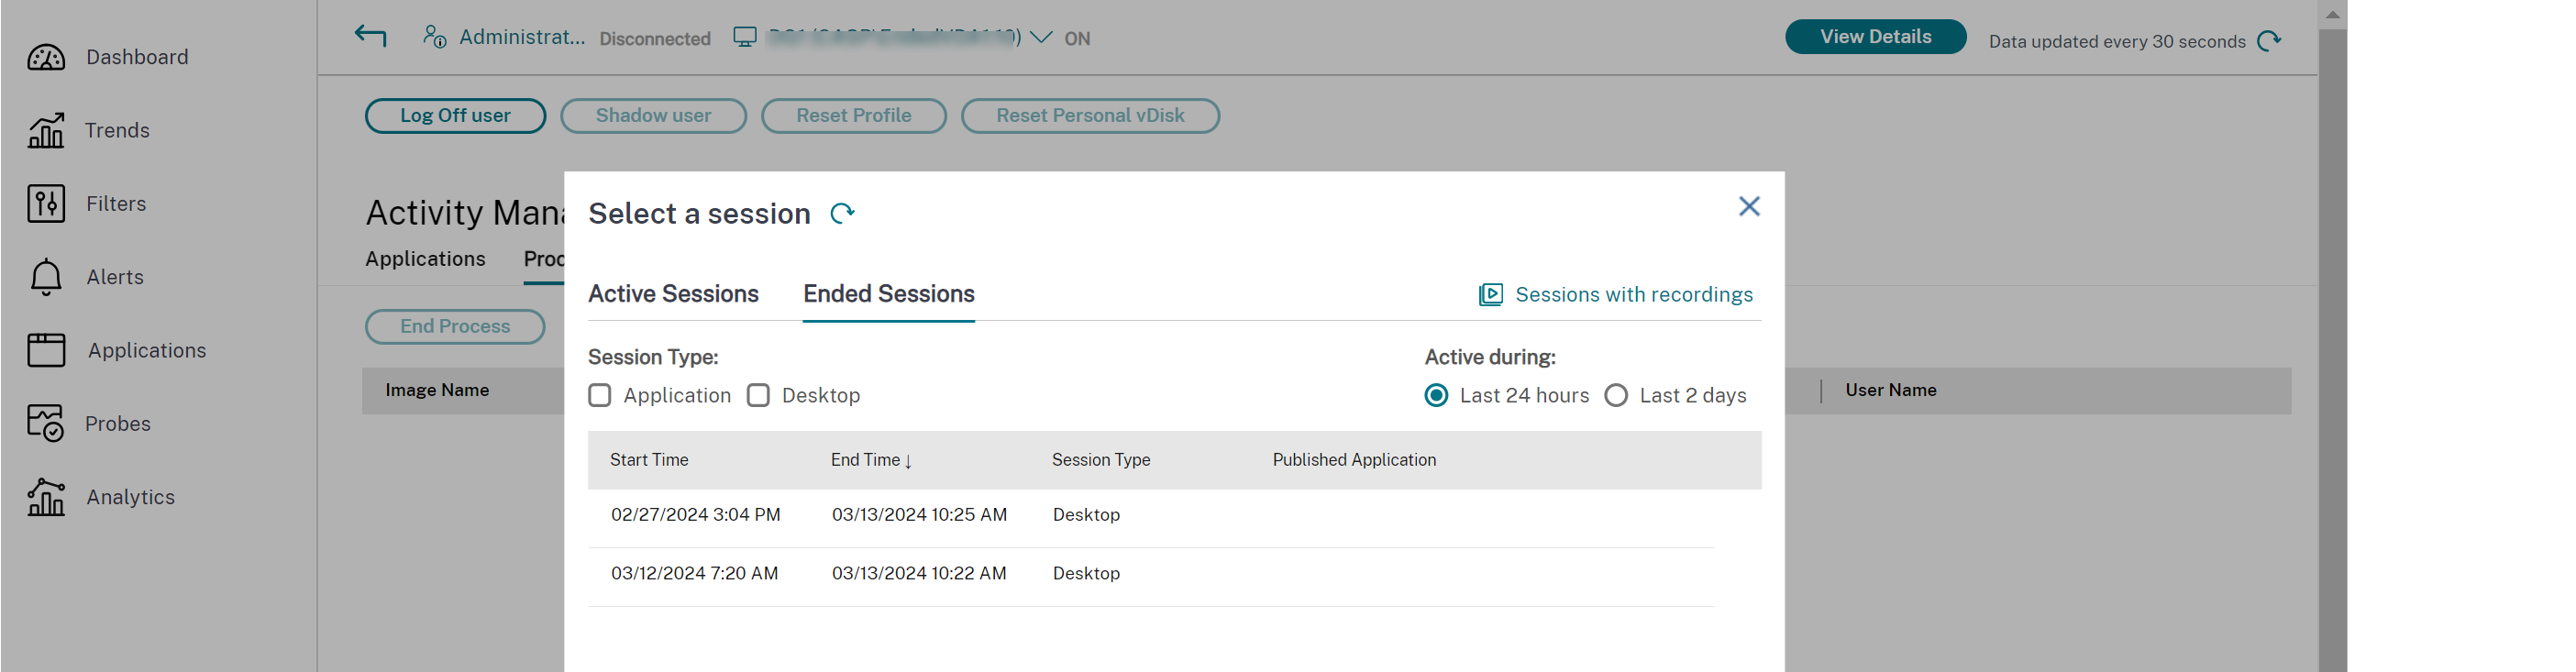 Historical user sessions Activity Manager